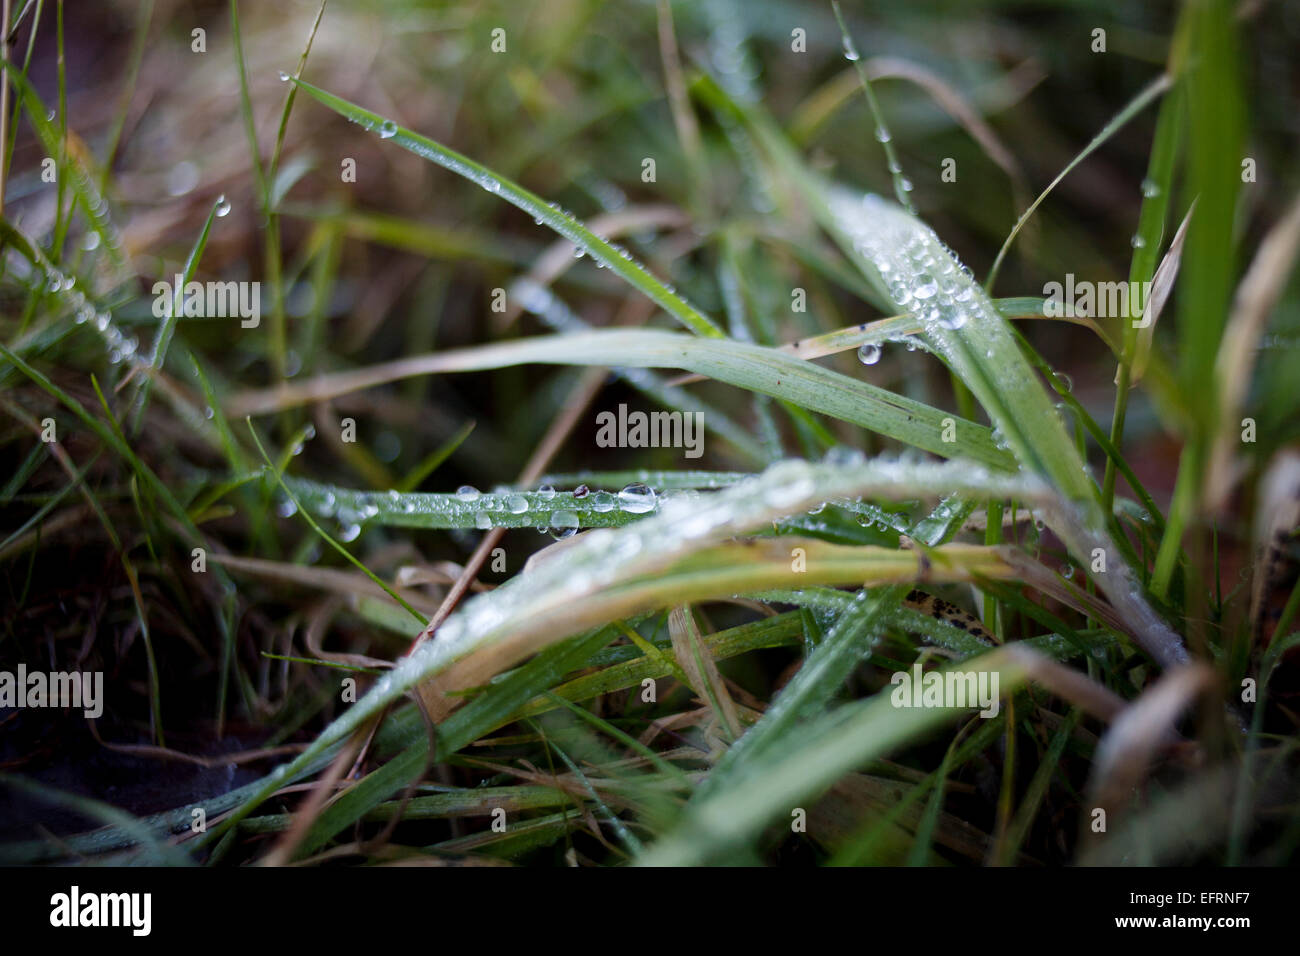 Grass wet with dew. Stock Photo